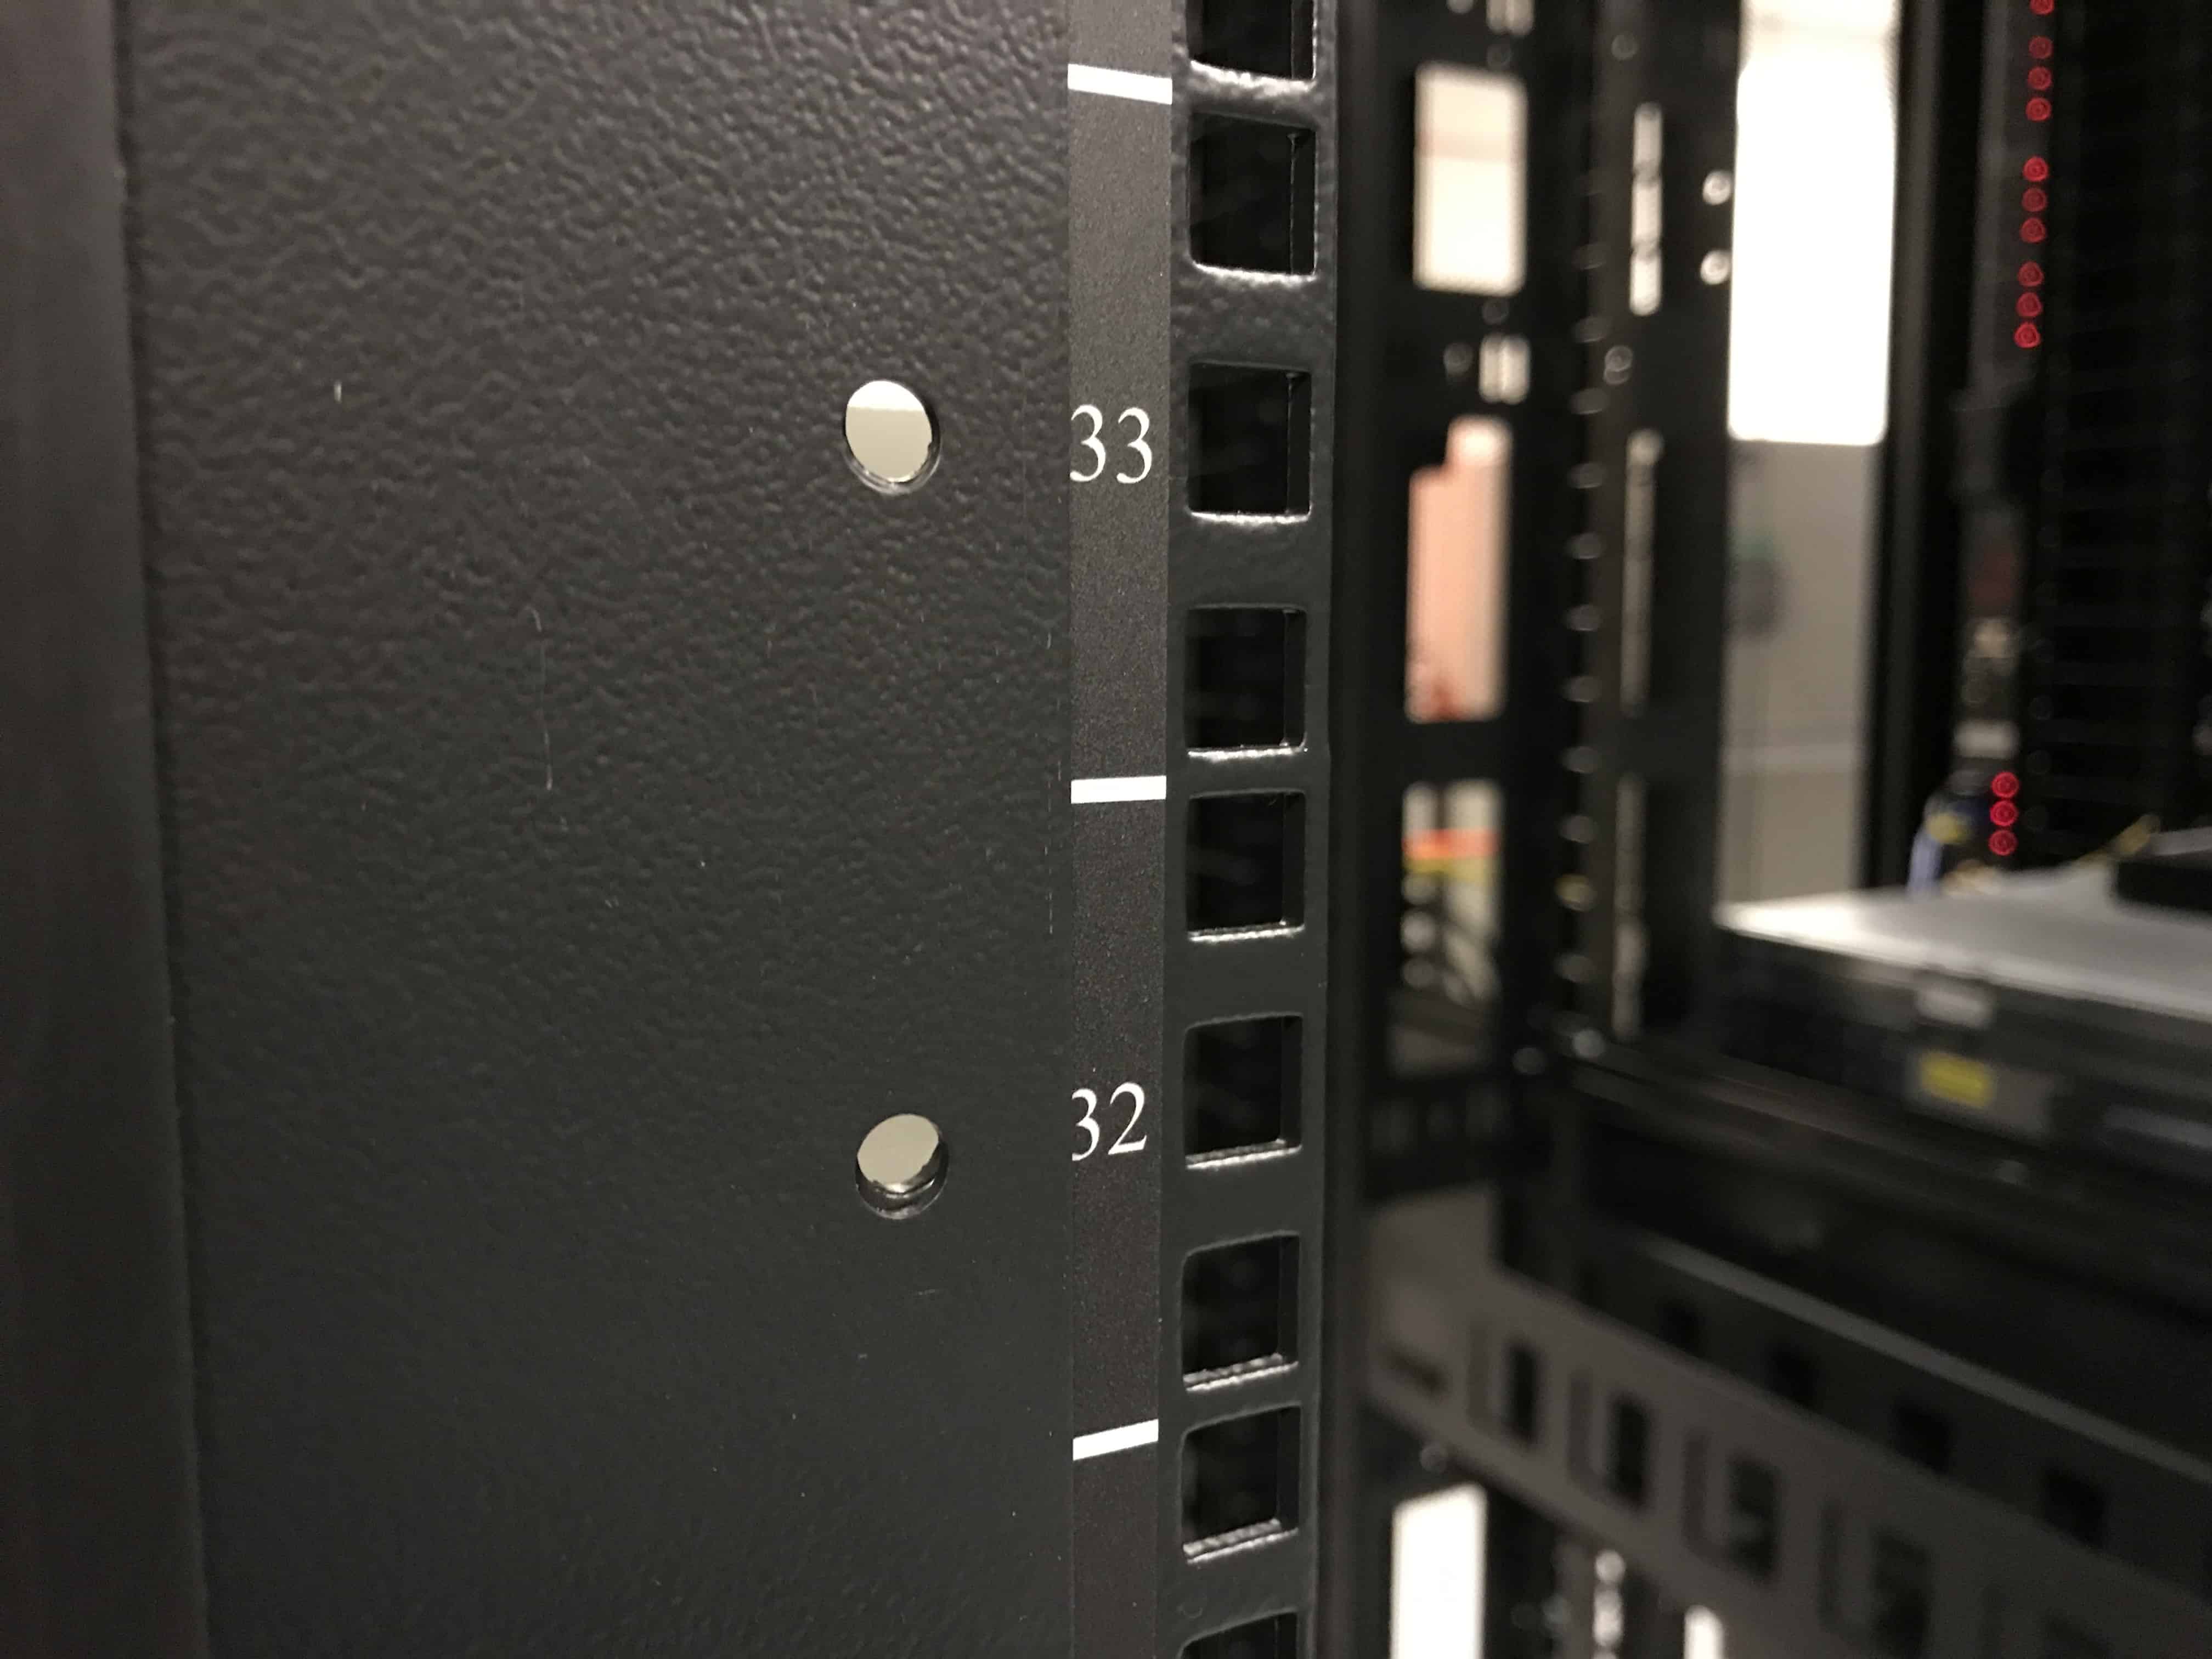 What Does “U” Mean In A Server Rack